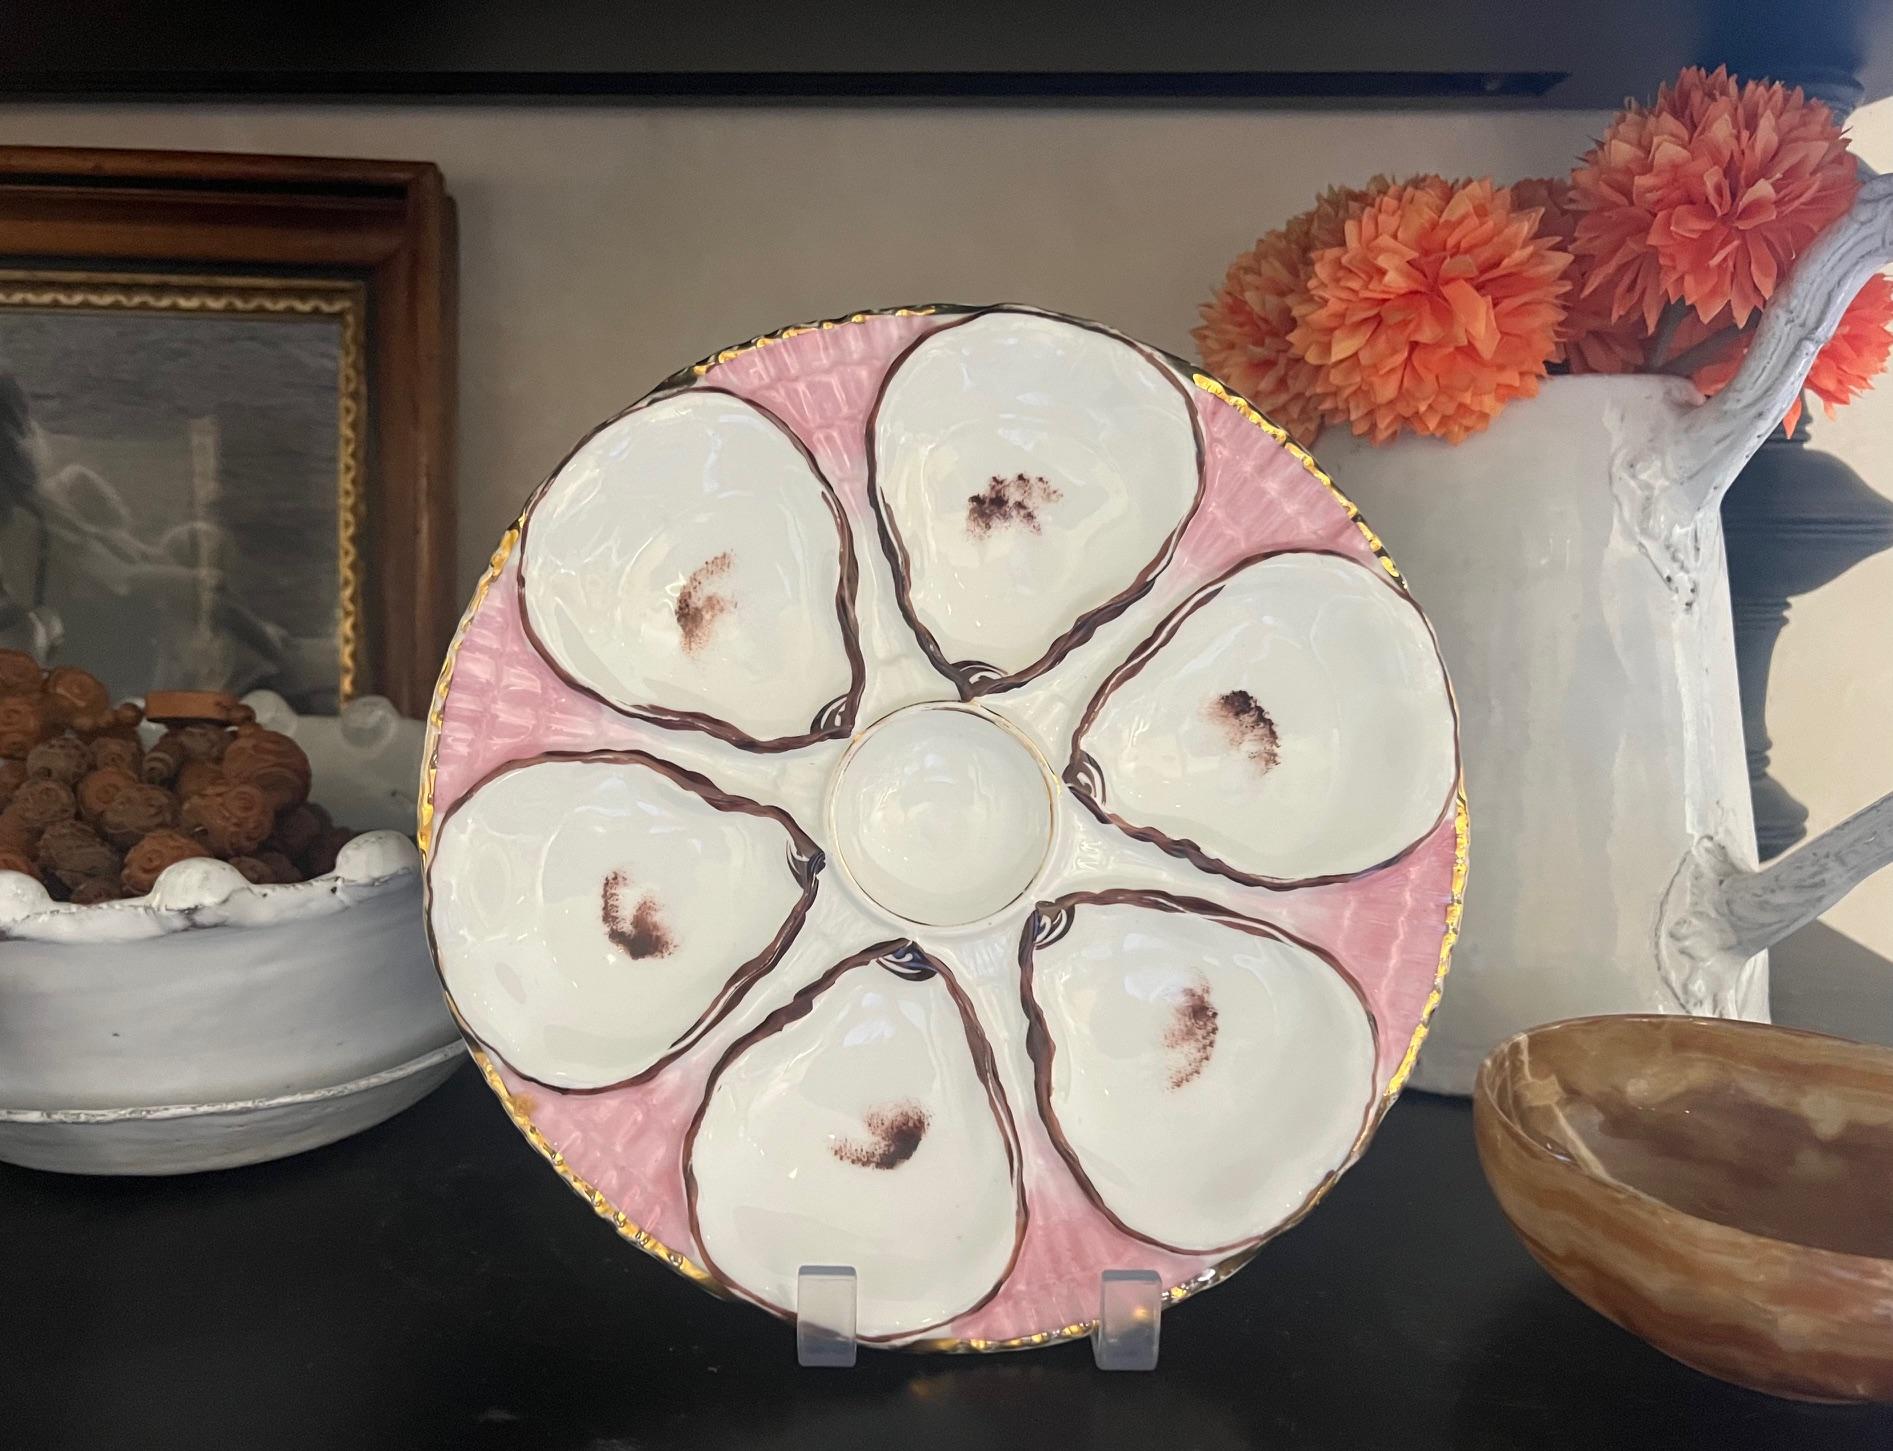 Antique oyster plate made by Carl Tielsch in the late 19th century in Germany.  The plate has six wells for oysters and a center well for lemon wedges. The background is a vivid pink with a gold rim. Hallmarked on the bottom for Carl Tielsch.